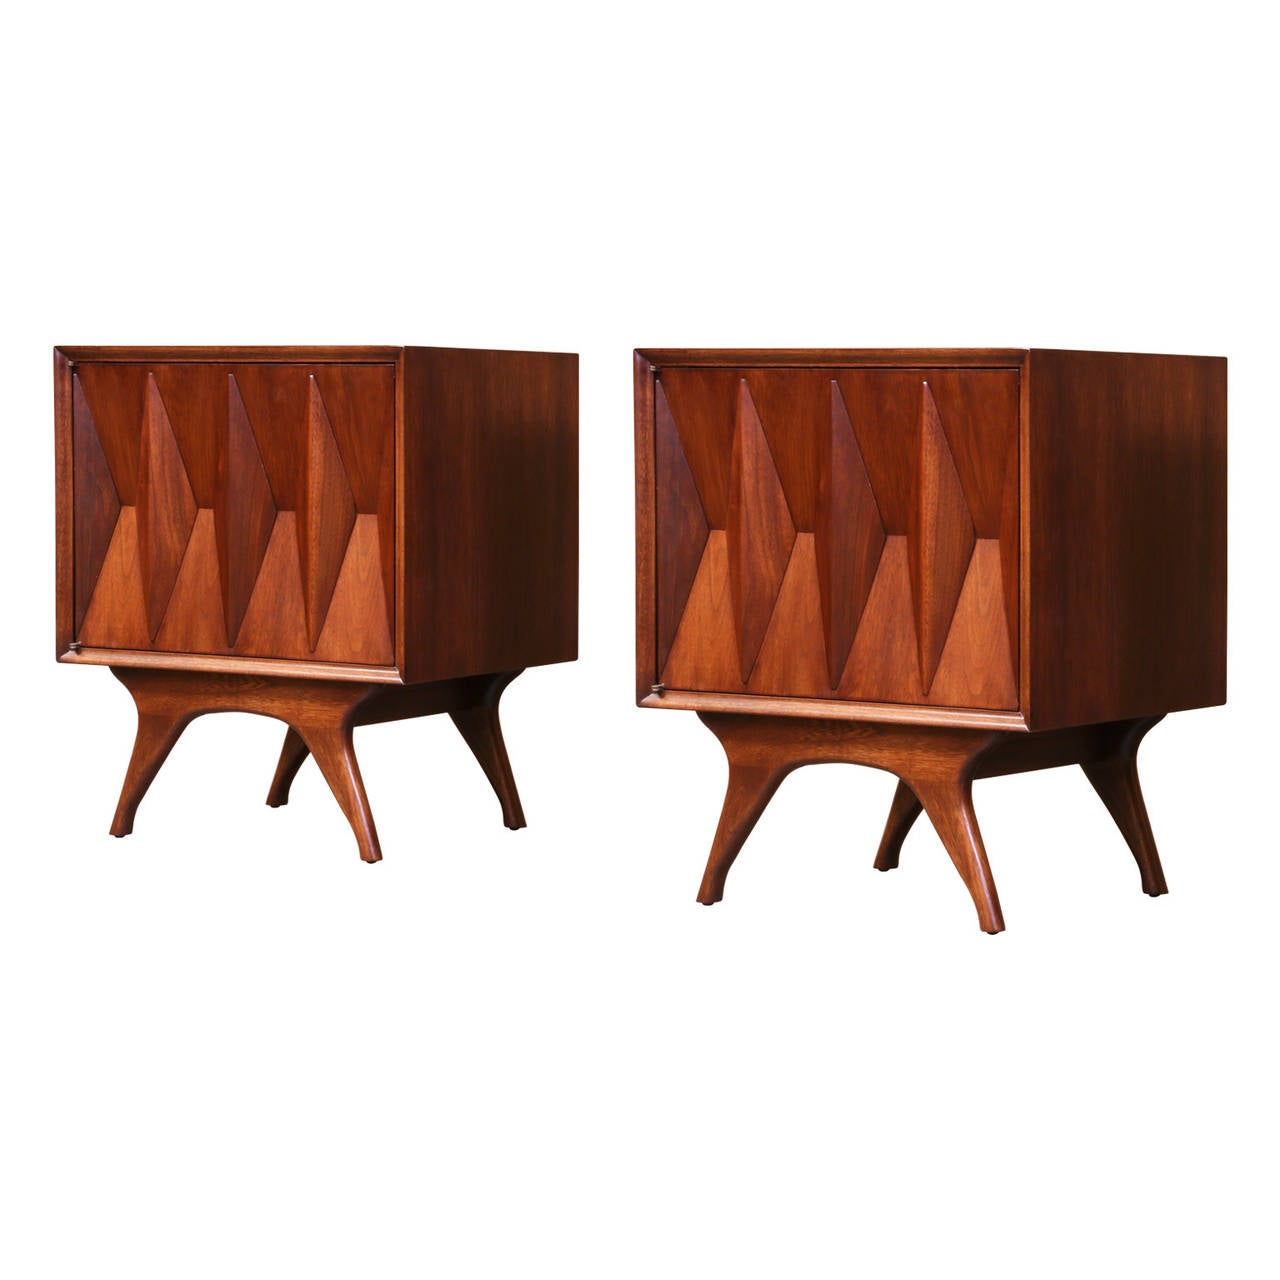 Designer: United Furniture Co.
Manufacturer: United Furniture Co.
Period/Style: Mid Century Modern
Country: United States
Date: 1960’s

Dimensions: 25.75H x 22W x 16D
Materials: Walnut, Lacquer
Condition: Excellent – Newly Refinished
Number